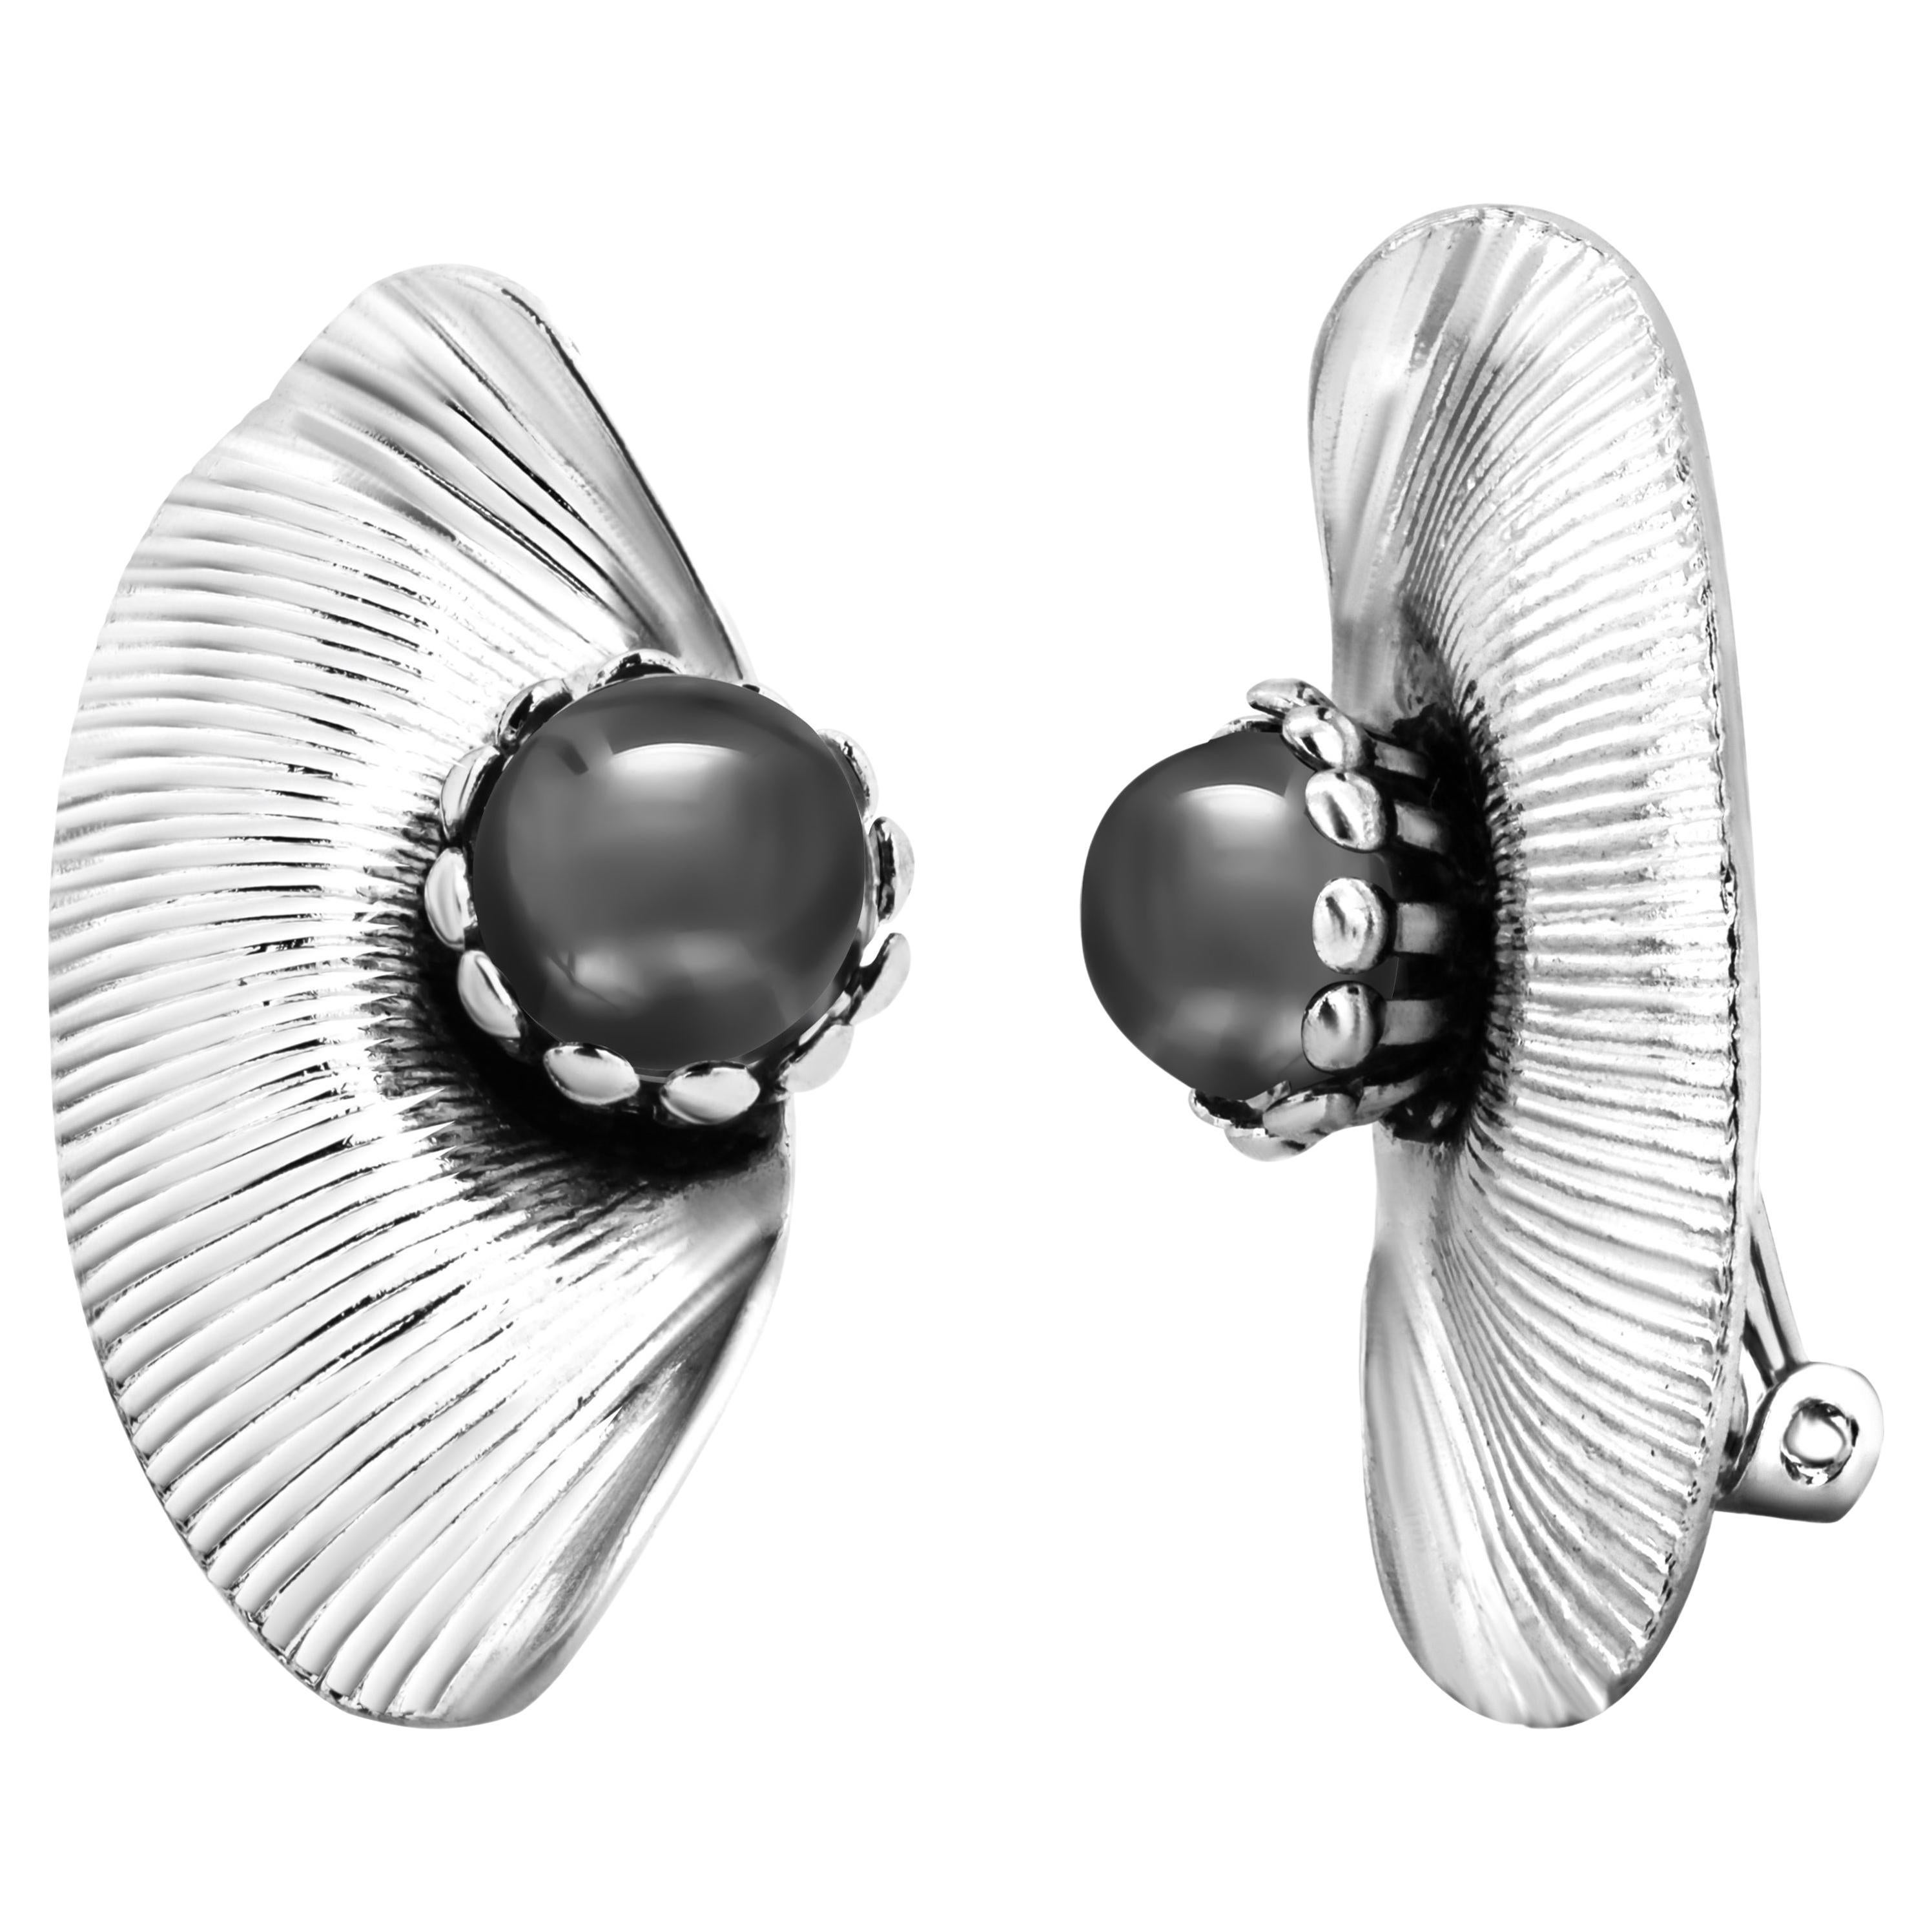 Cartier Vintage 1970 Silver Clip Earrings Black Stone 1.80 by 0.80 Inch Size For Sale